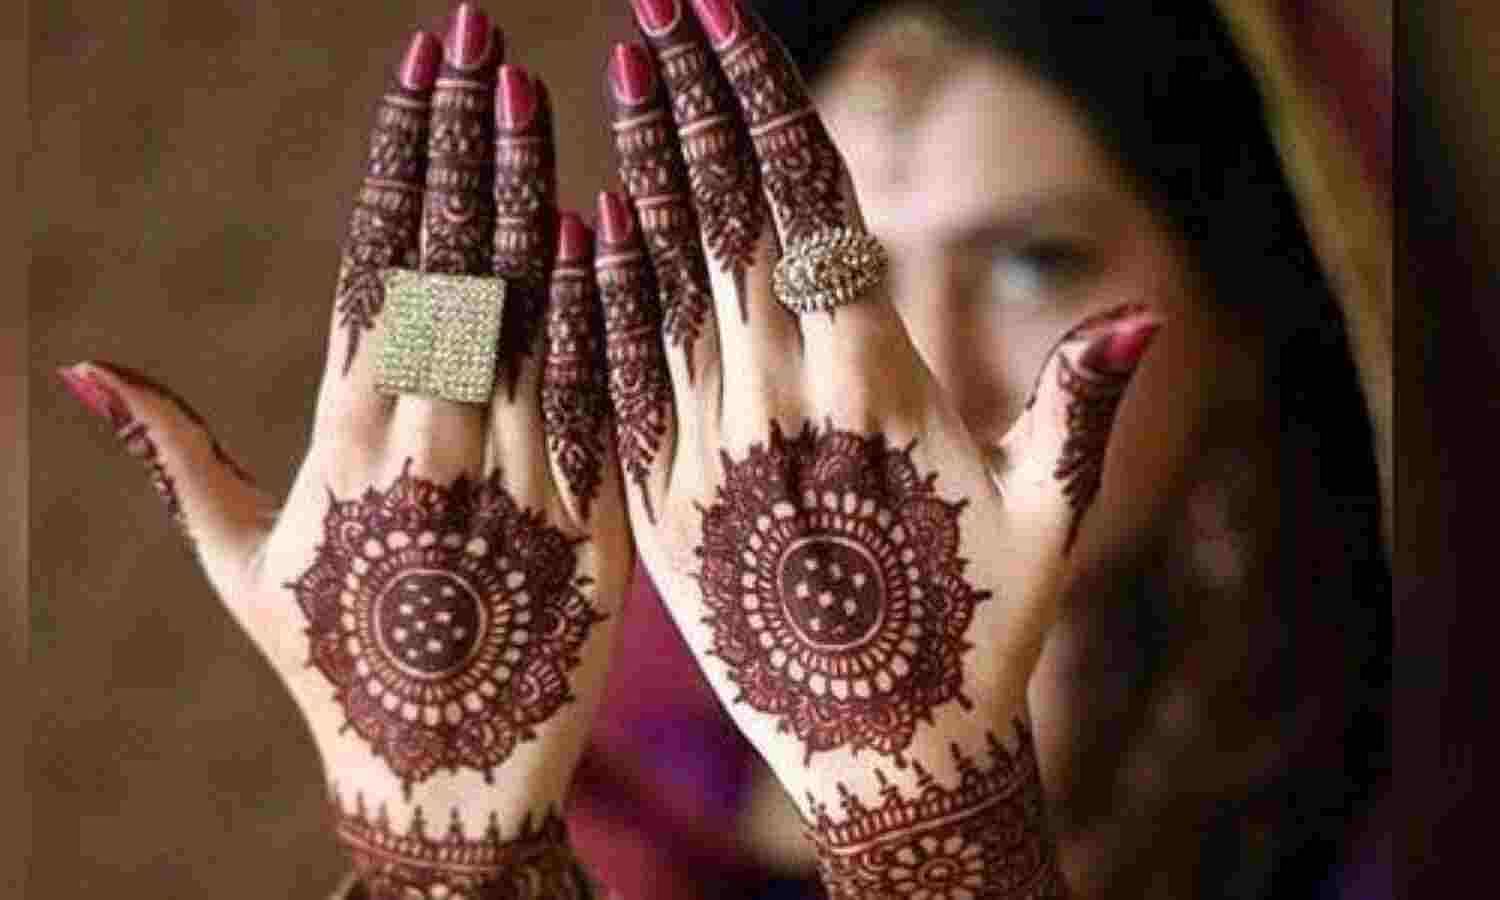 Round Mehndi Designs for hands You Should Definitely Try In 2020